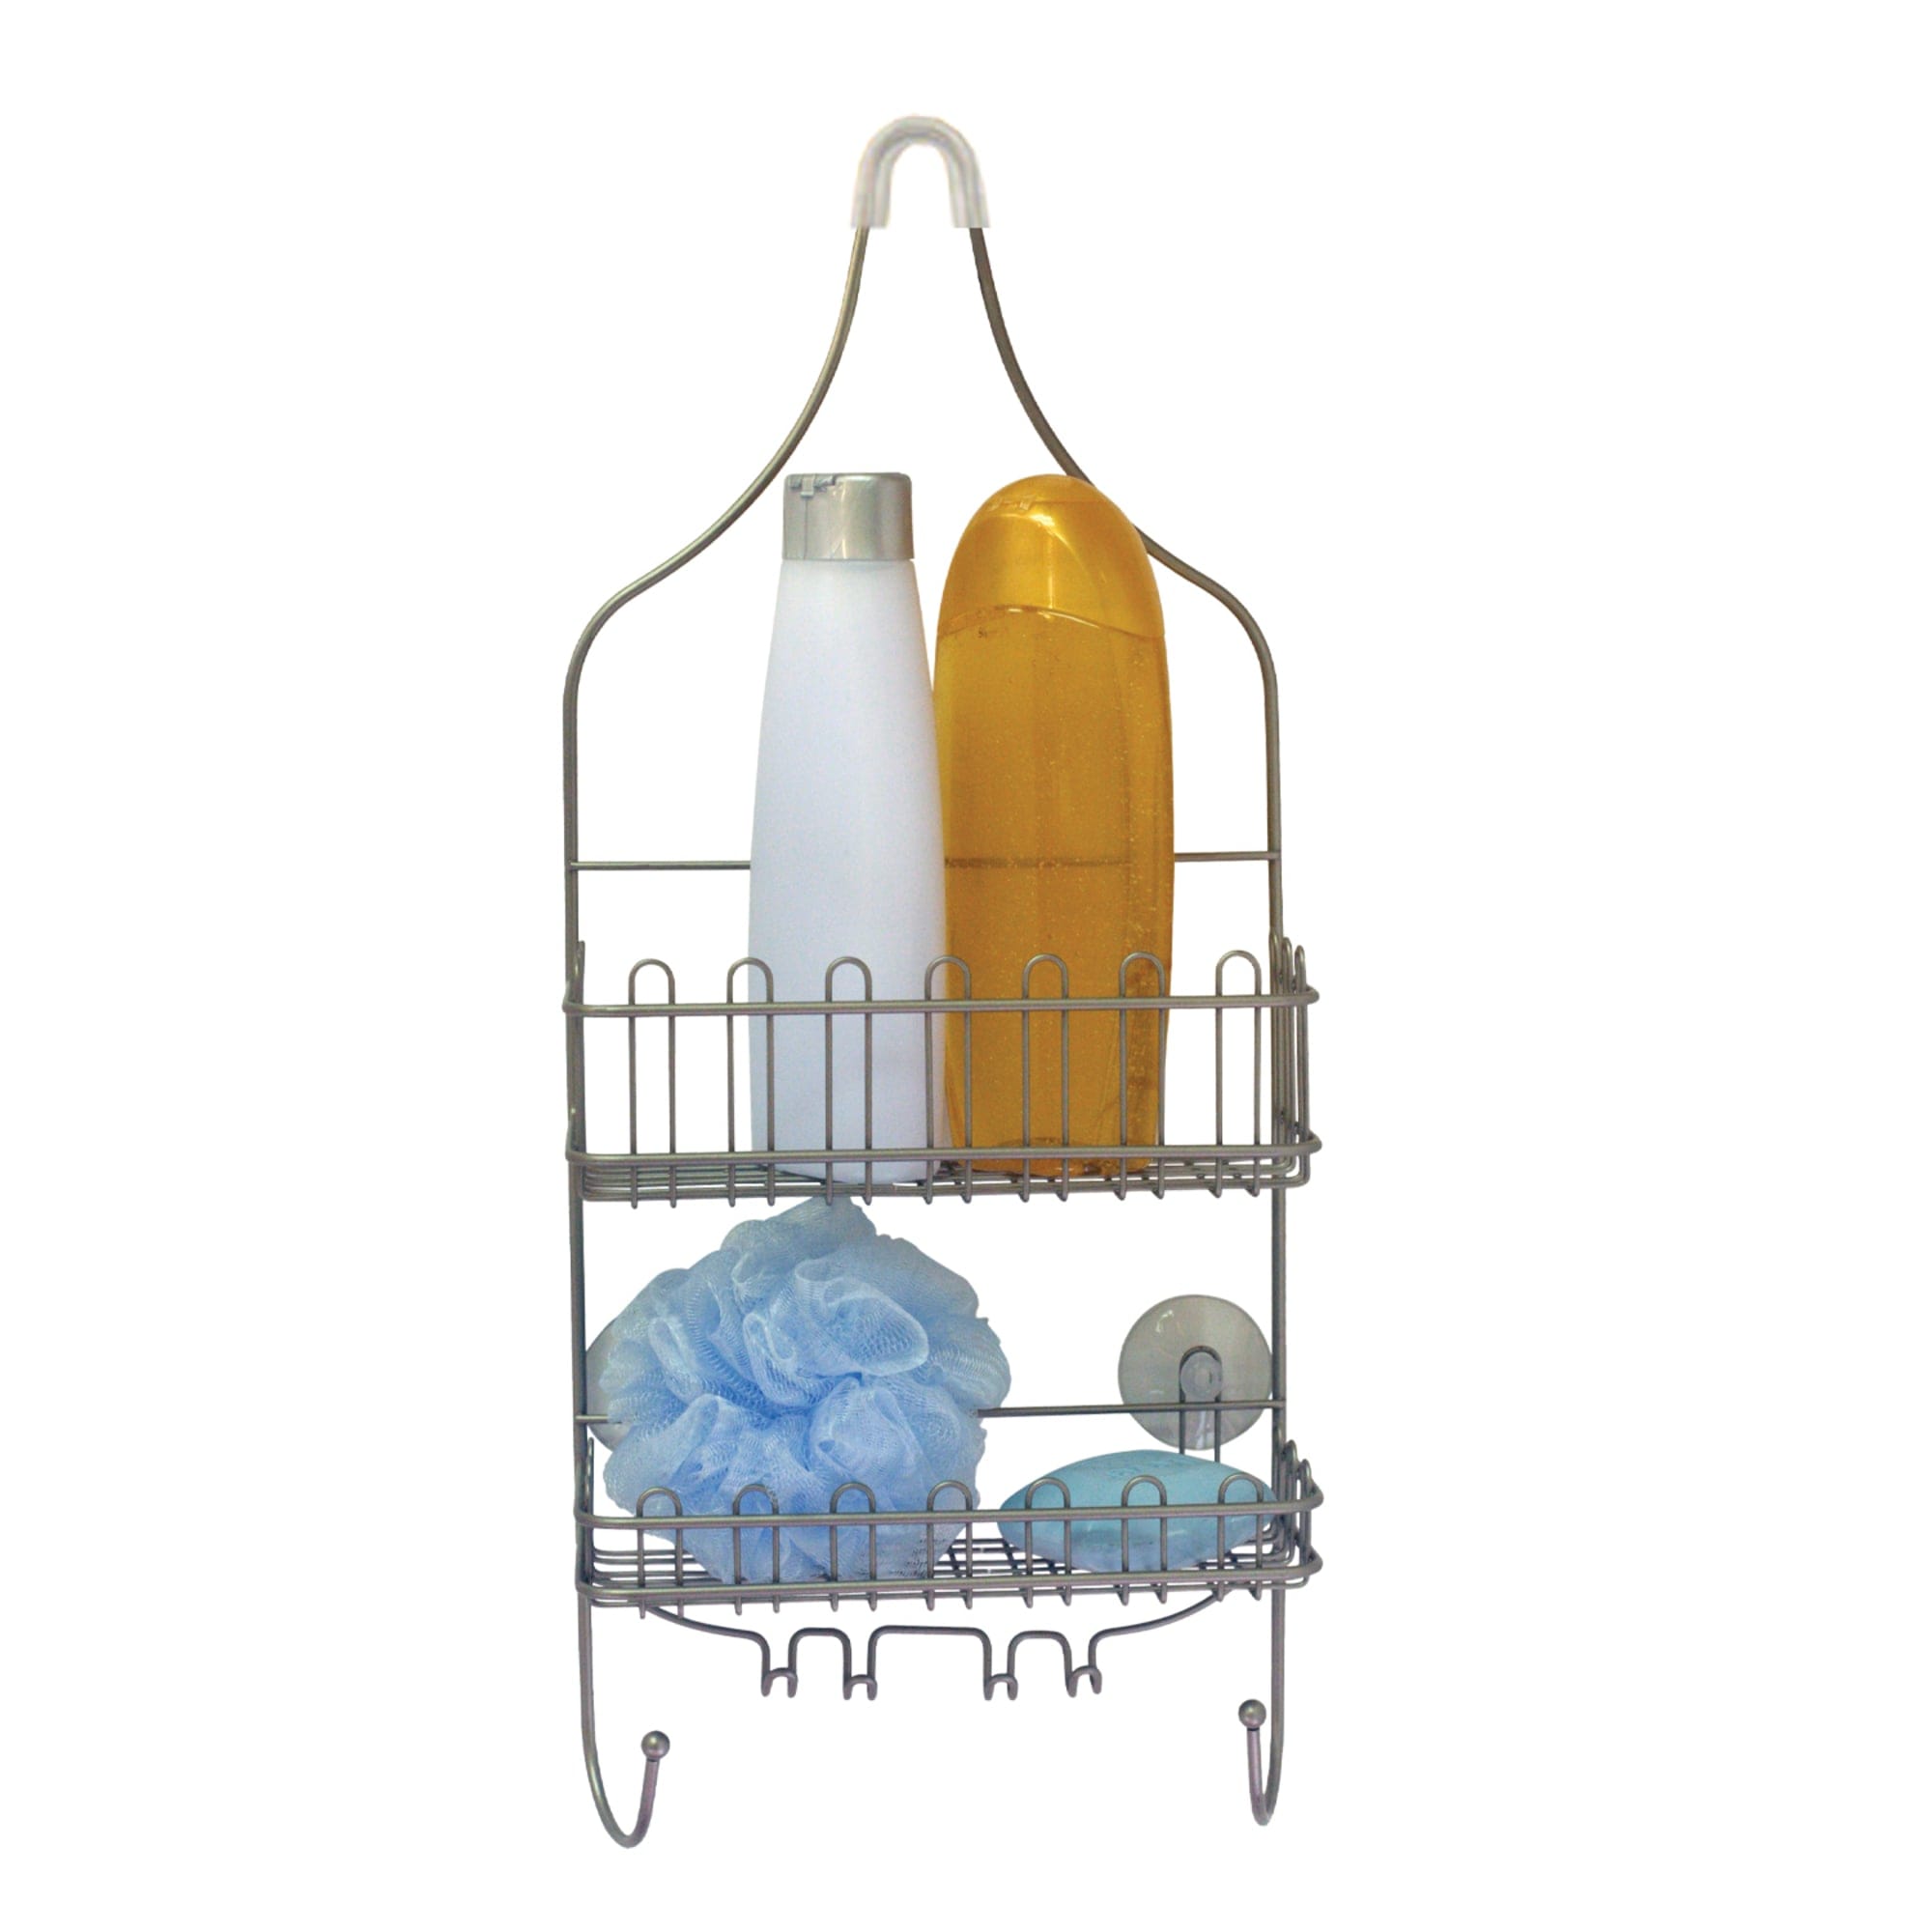 Home Basics 2 Tier Heavy Weight Steel Shower Caddy with Hooks, Satin Nickel $10.00 EACH, CASE PACK OF 12